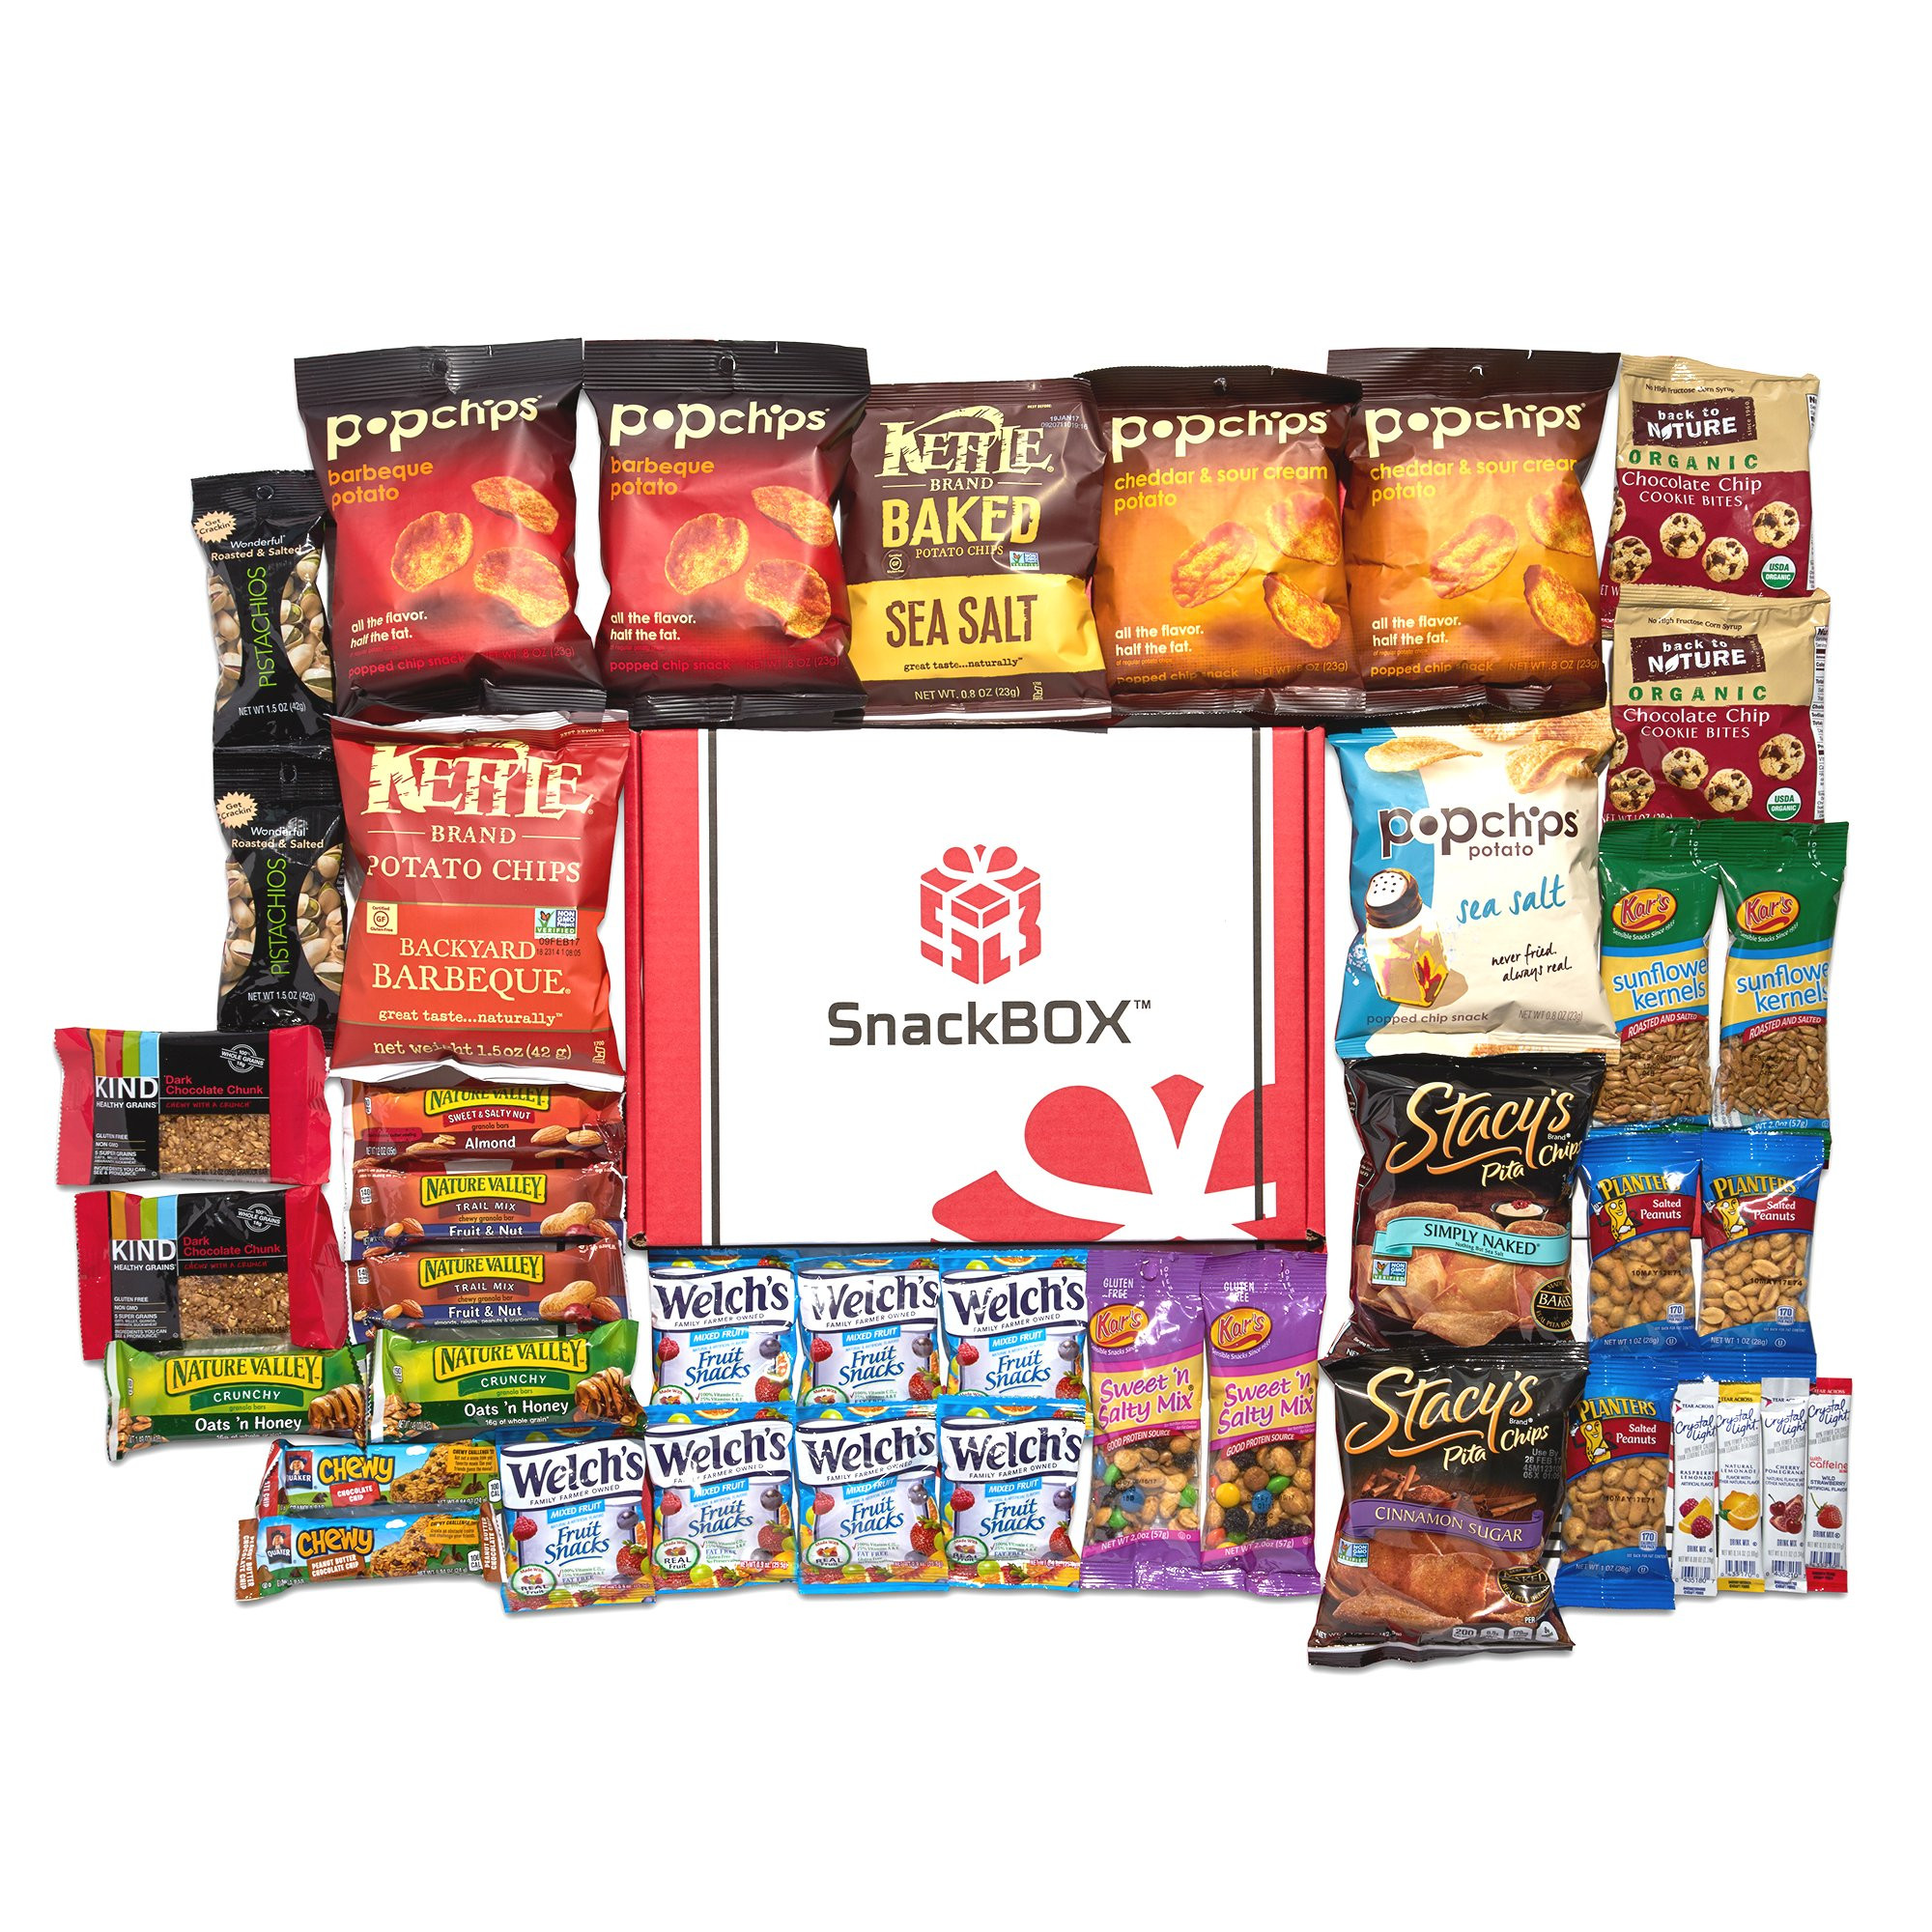 Amazon Healthy Snacks
 Amazon Healthy Snacks Care Package 45 Count by The